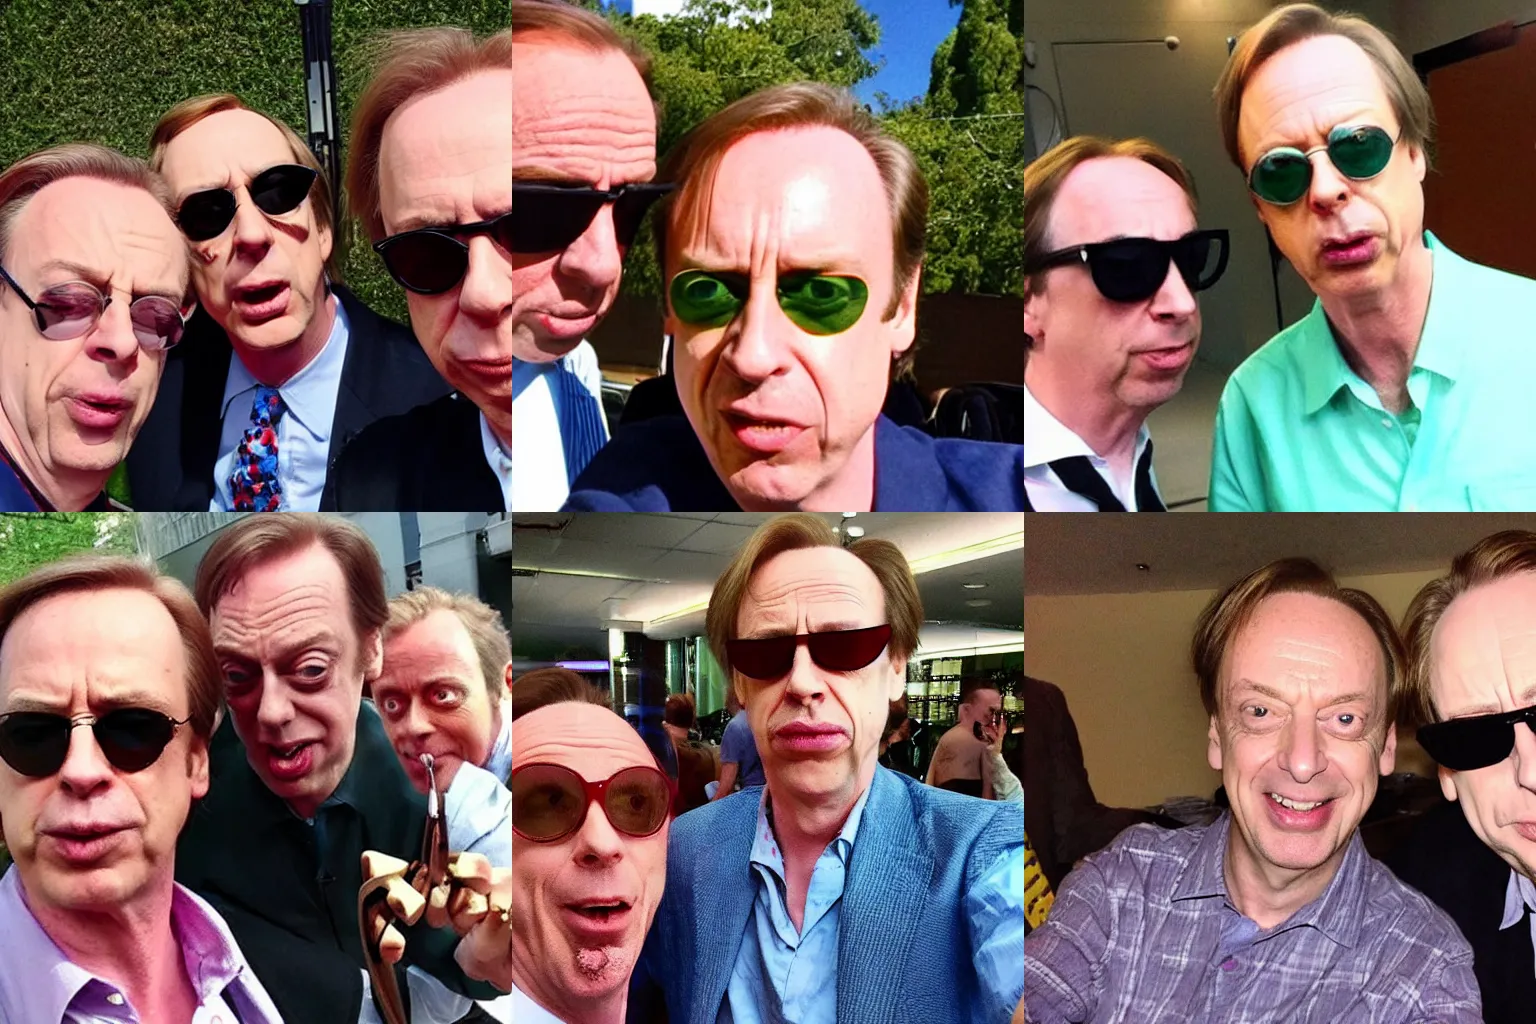 Prompt: Saul Goodman taking a selfie with Steve Buscemi with sunglasses, no beard, vintage shirt